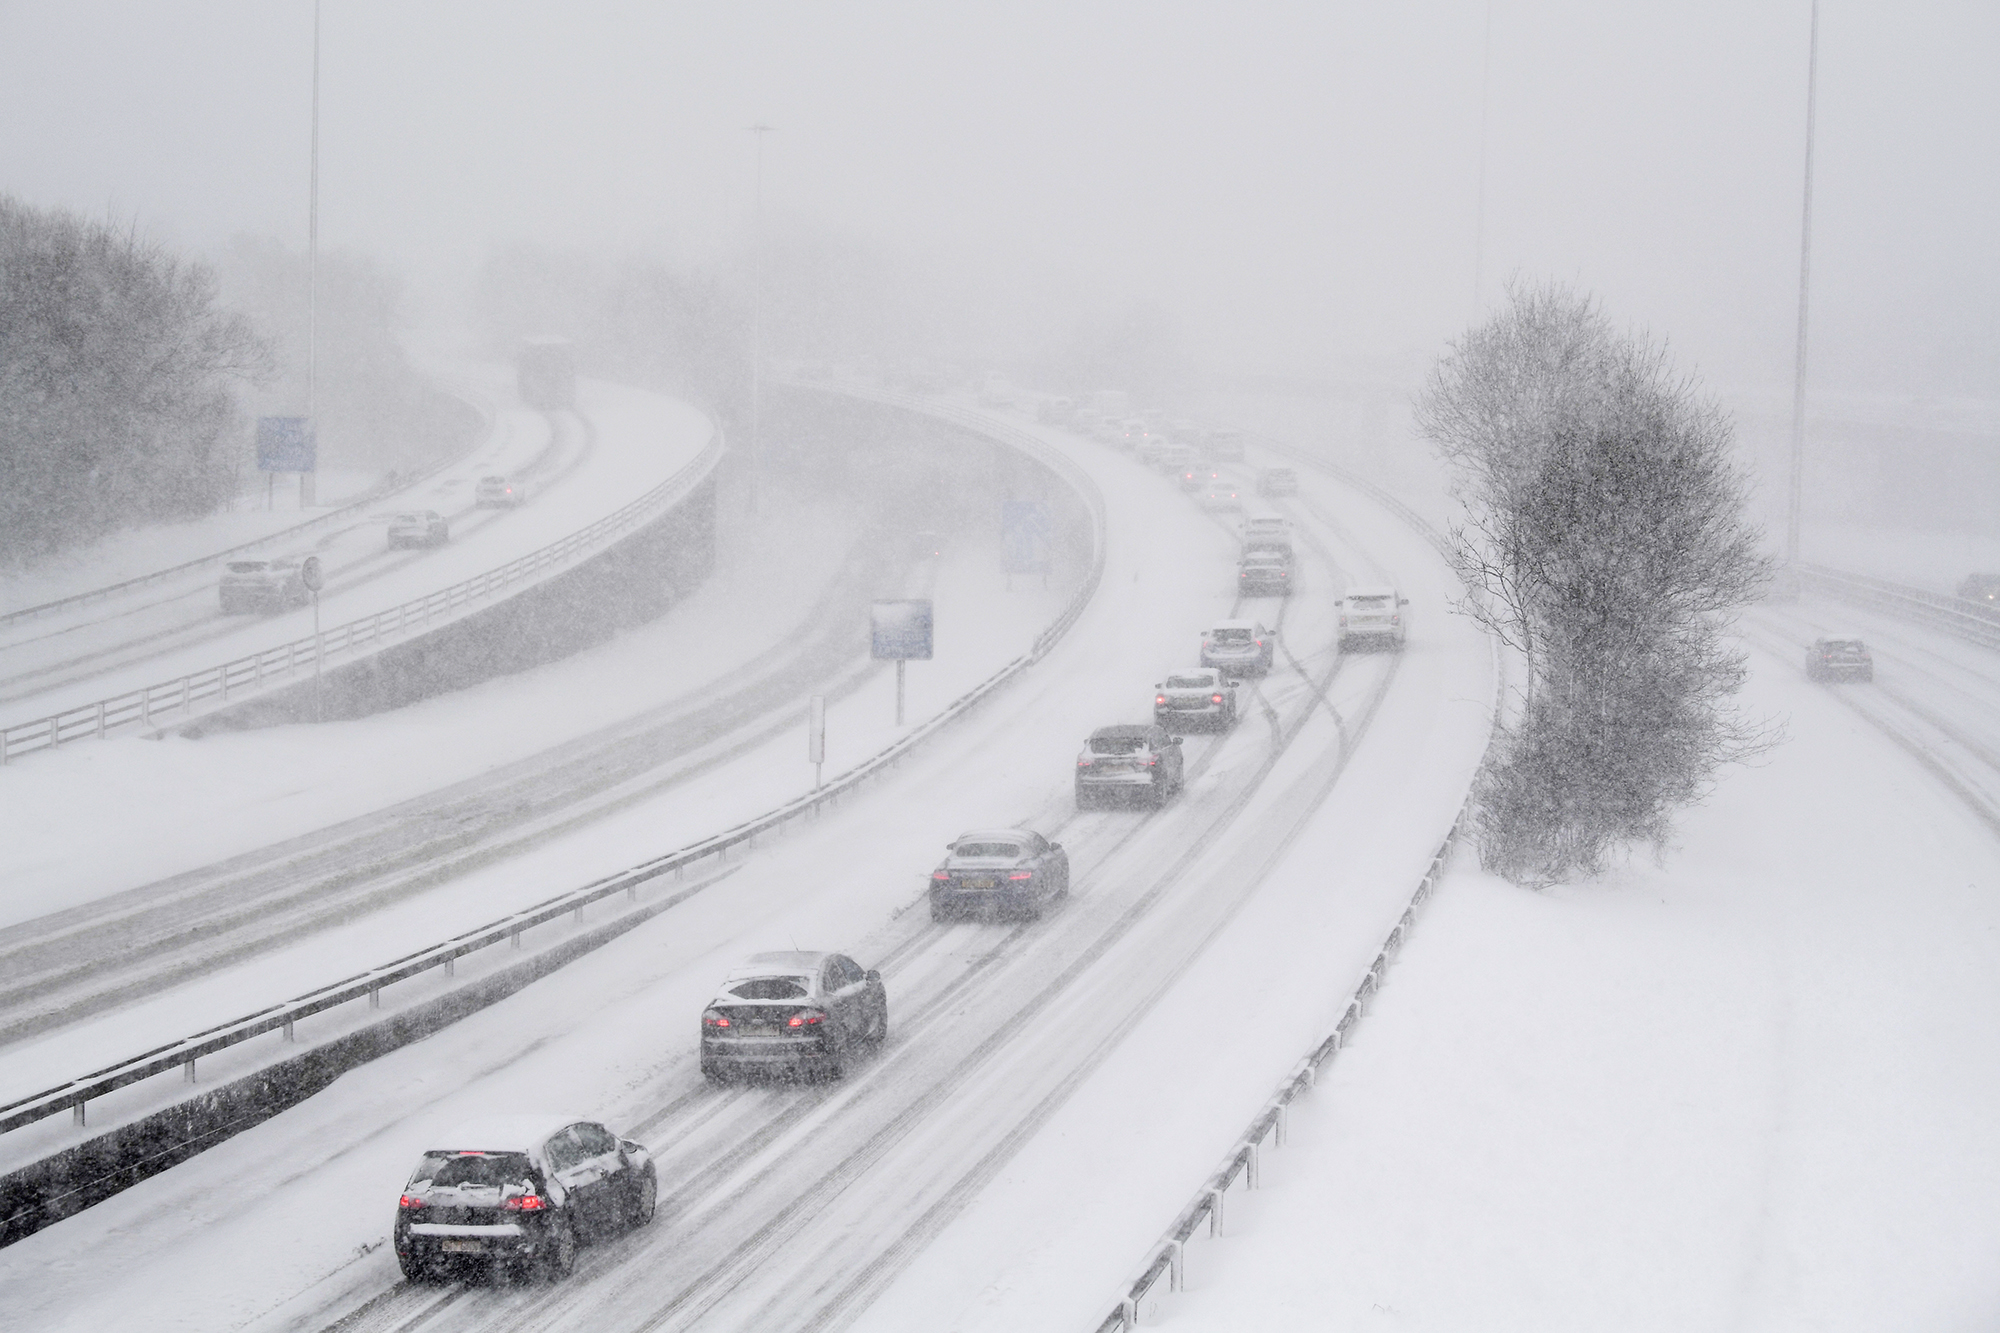 GLASGOW, UNITED KINGDOM - FEBRUARY 28: Vehicles drive through snow on the M8 in Glasgow on February 28, in Glasgow, Scotland. Freezing weather conditions dubbed the 'Beast from the East' bring snow and sub-zero temperatures to the UK. Amber warnings are in place in northern England, the East Midlands, London, the east and south-east of England. Scotland's weather warning has been upgraded to red, which means risk to life, widespread damage, travel and power disruption are likely. (Photo by Jeff J Mitchell/Getty Images)